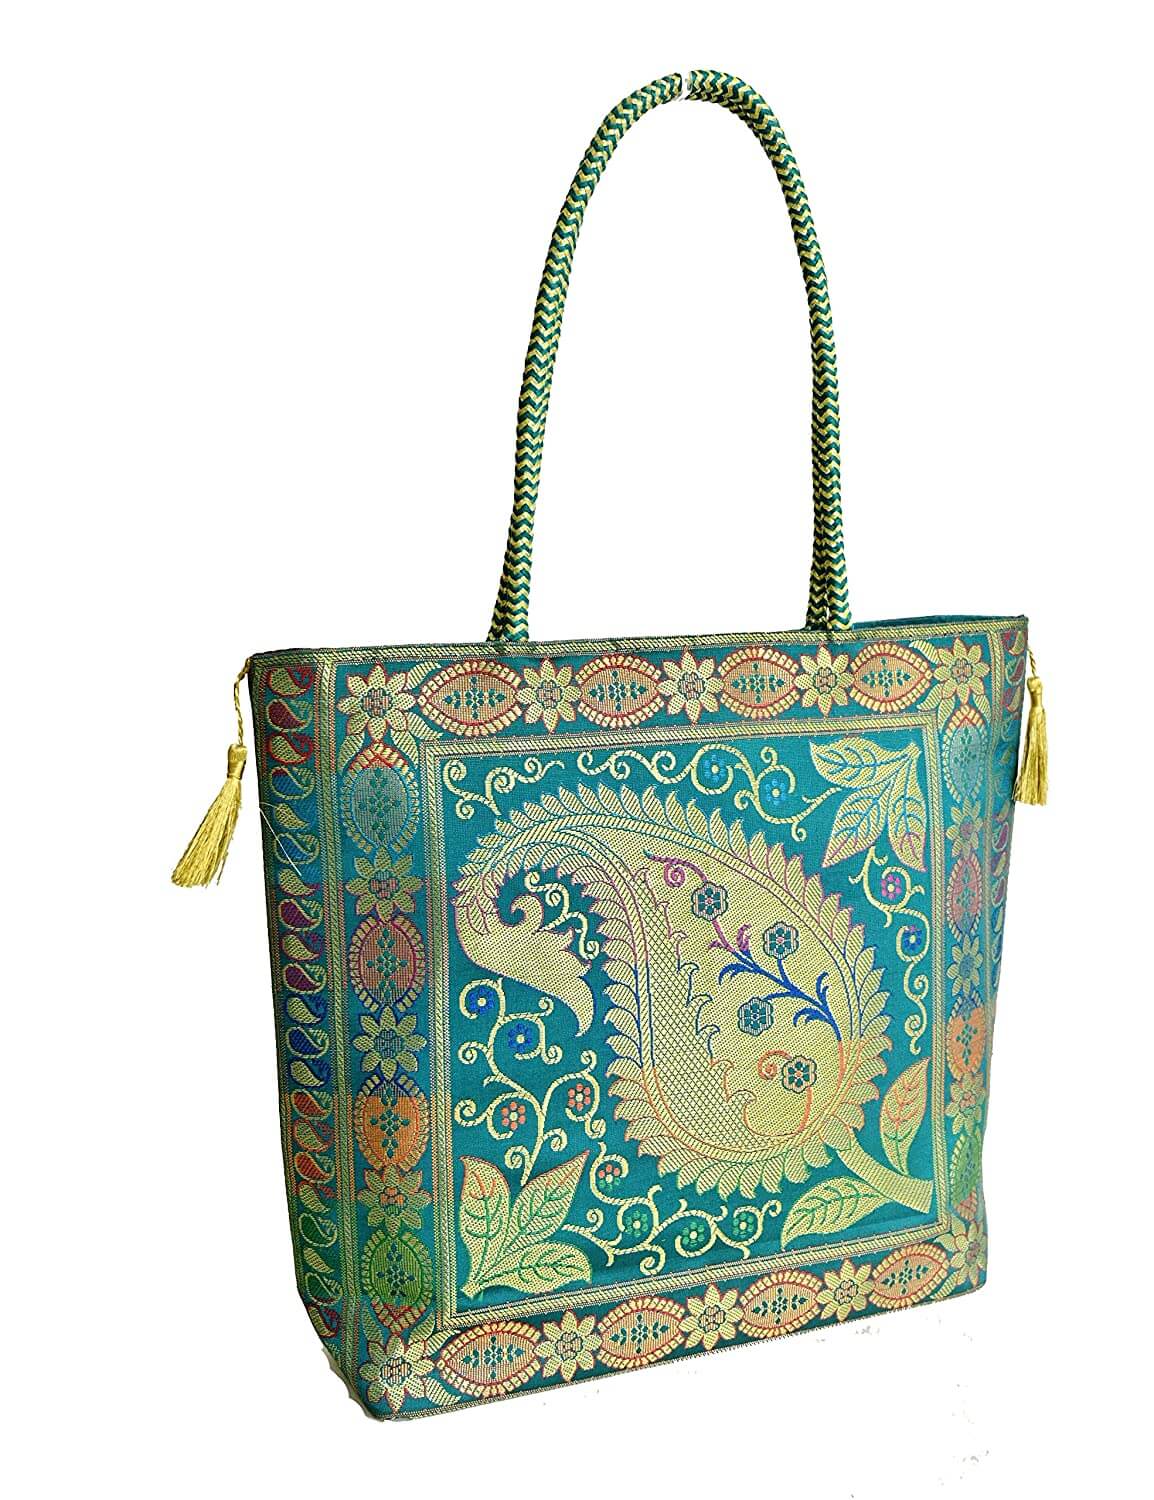 Embroidery Silk Handicraft Hand Bag, Shoulder, Tote Bag For Ladies (13 x 11.5 x 7.5 Inches, Leaves & Flower, Green Color) Mangal Fashions | Indian Home Decor and Craft